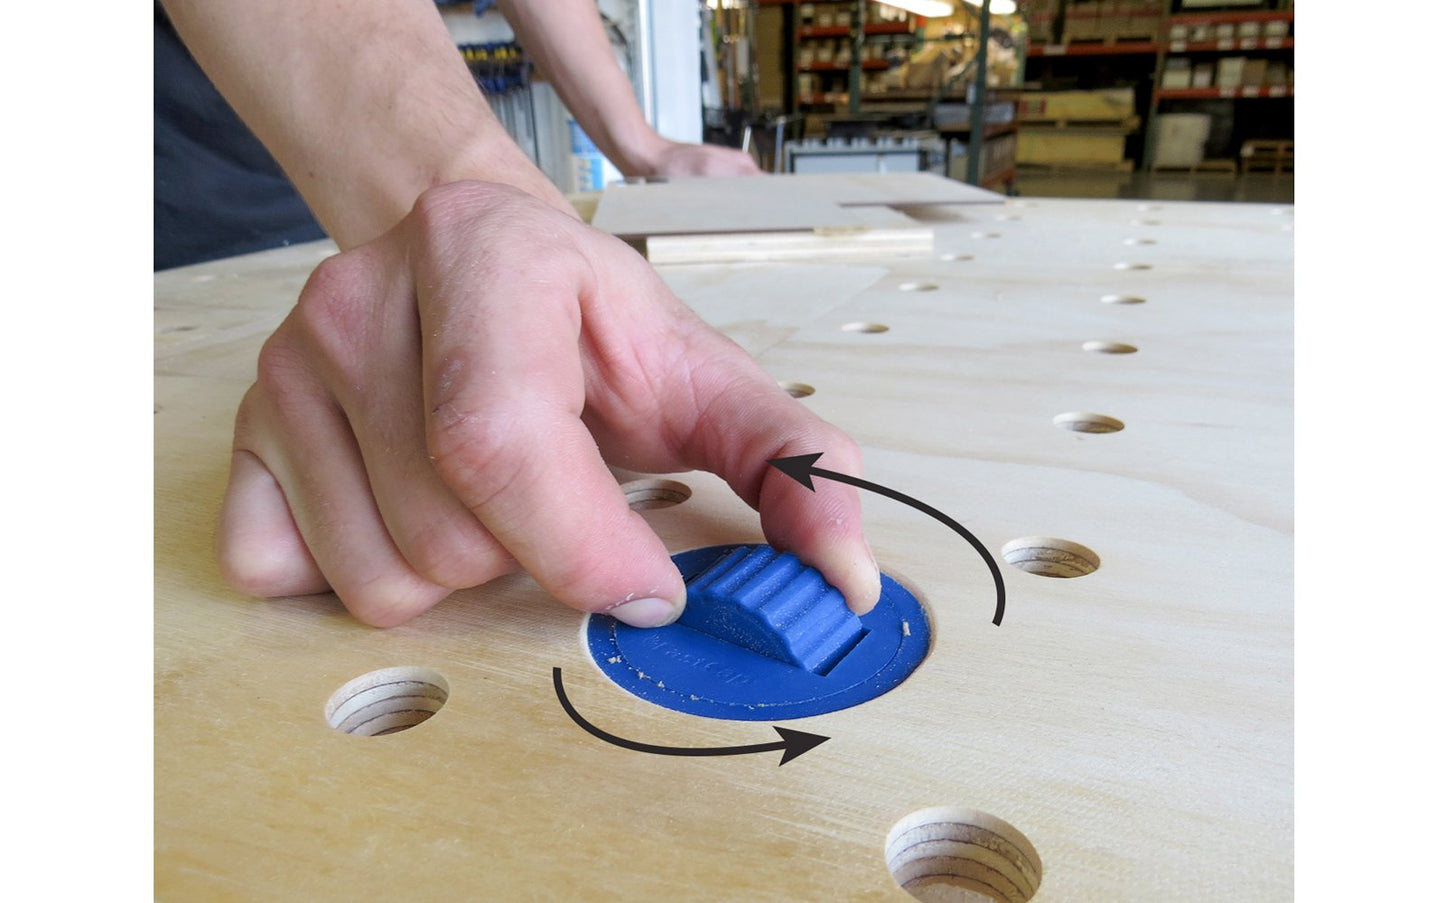 Gives great functionality to your workbench when dogs are needed - 2-1/2" diameter - Model BLUE DOG SINGLE - use a 2-1/2" hole saw to drill out a hole, sand the top edge, & press the Blue Dog down into the hole until flush - height adjustment for any material thickness & the turntable feature allows flexibility - 663807025005